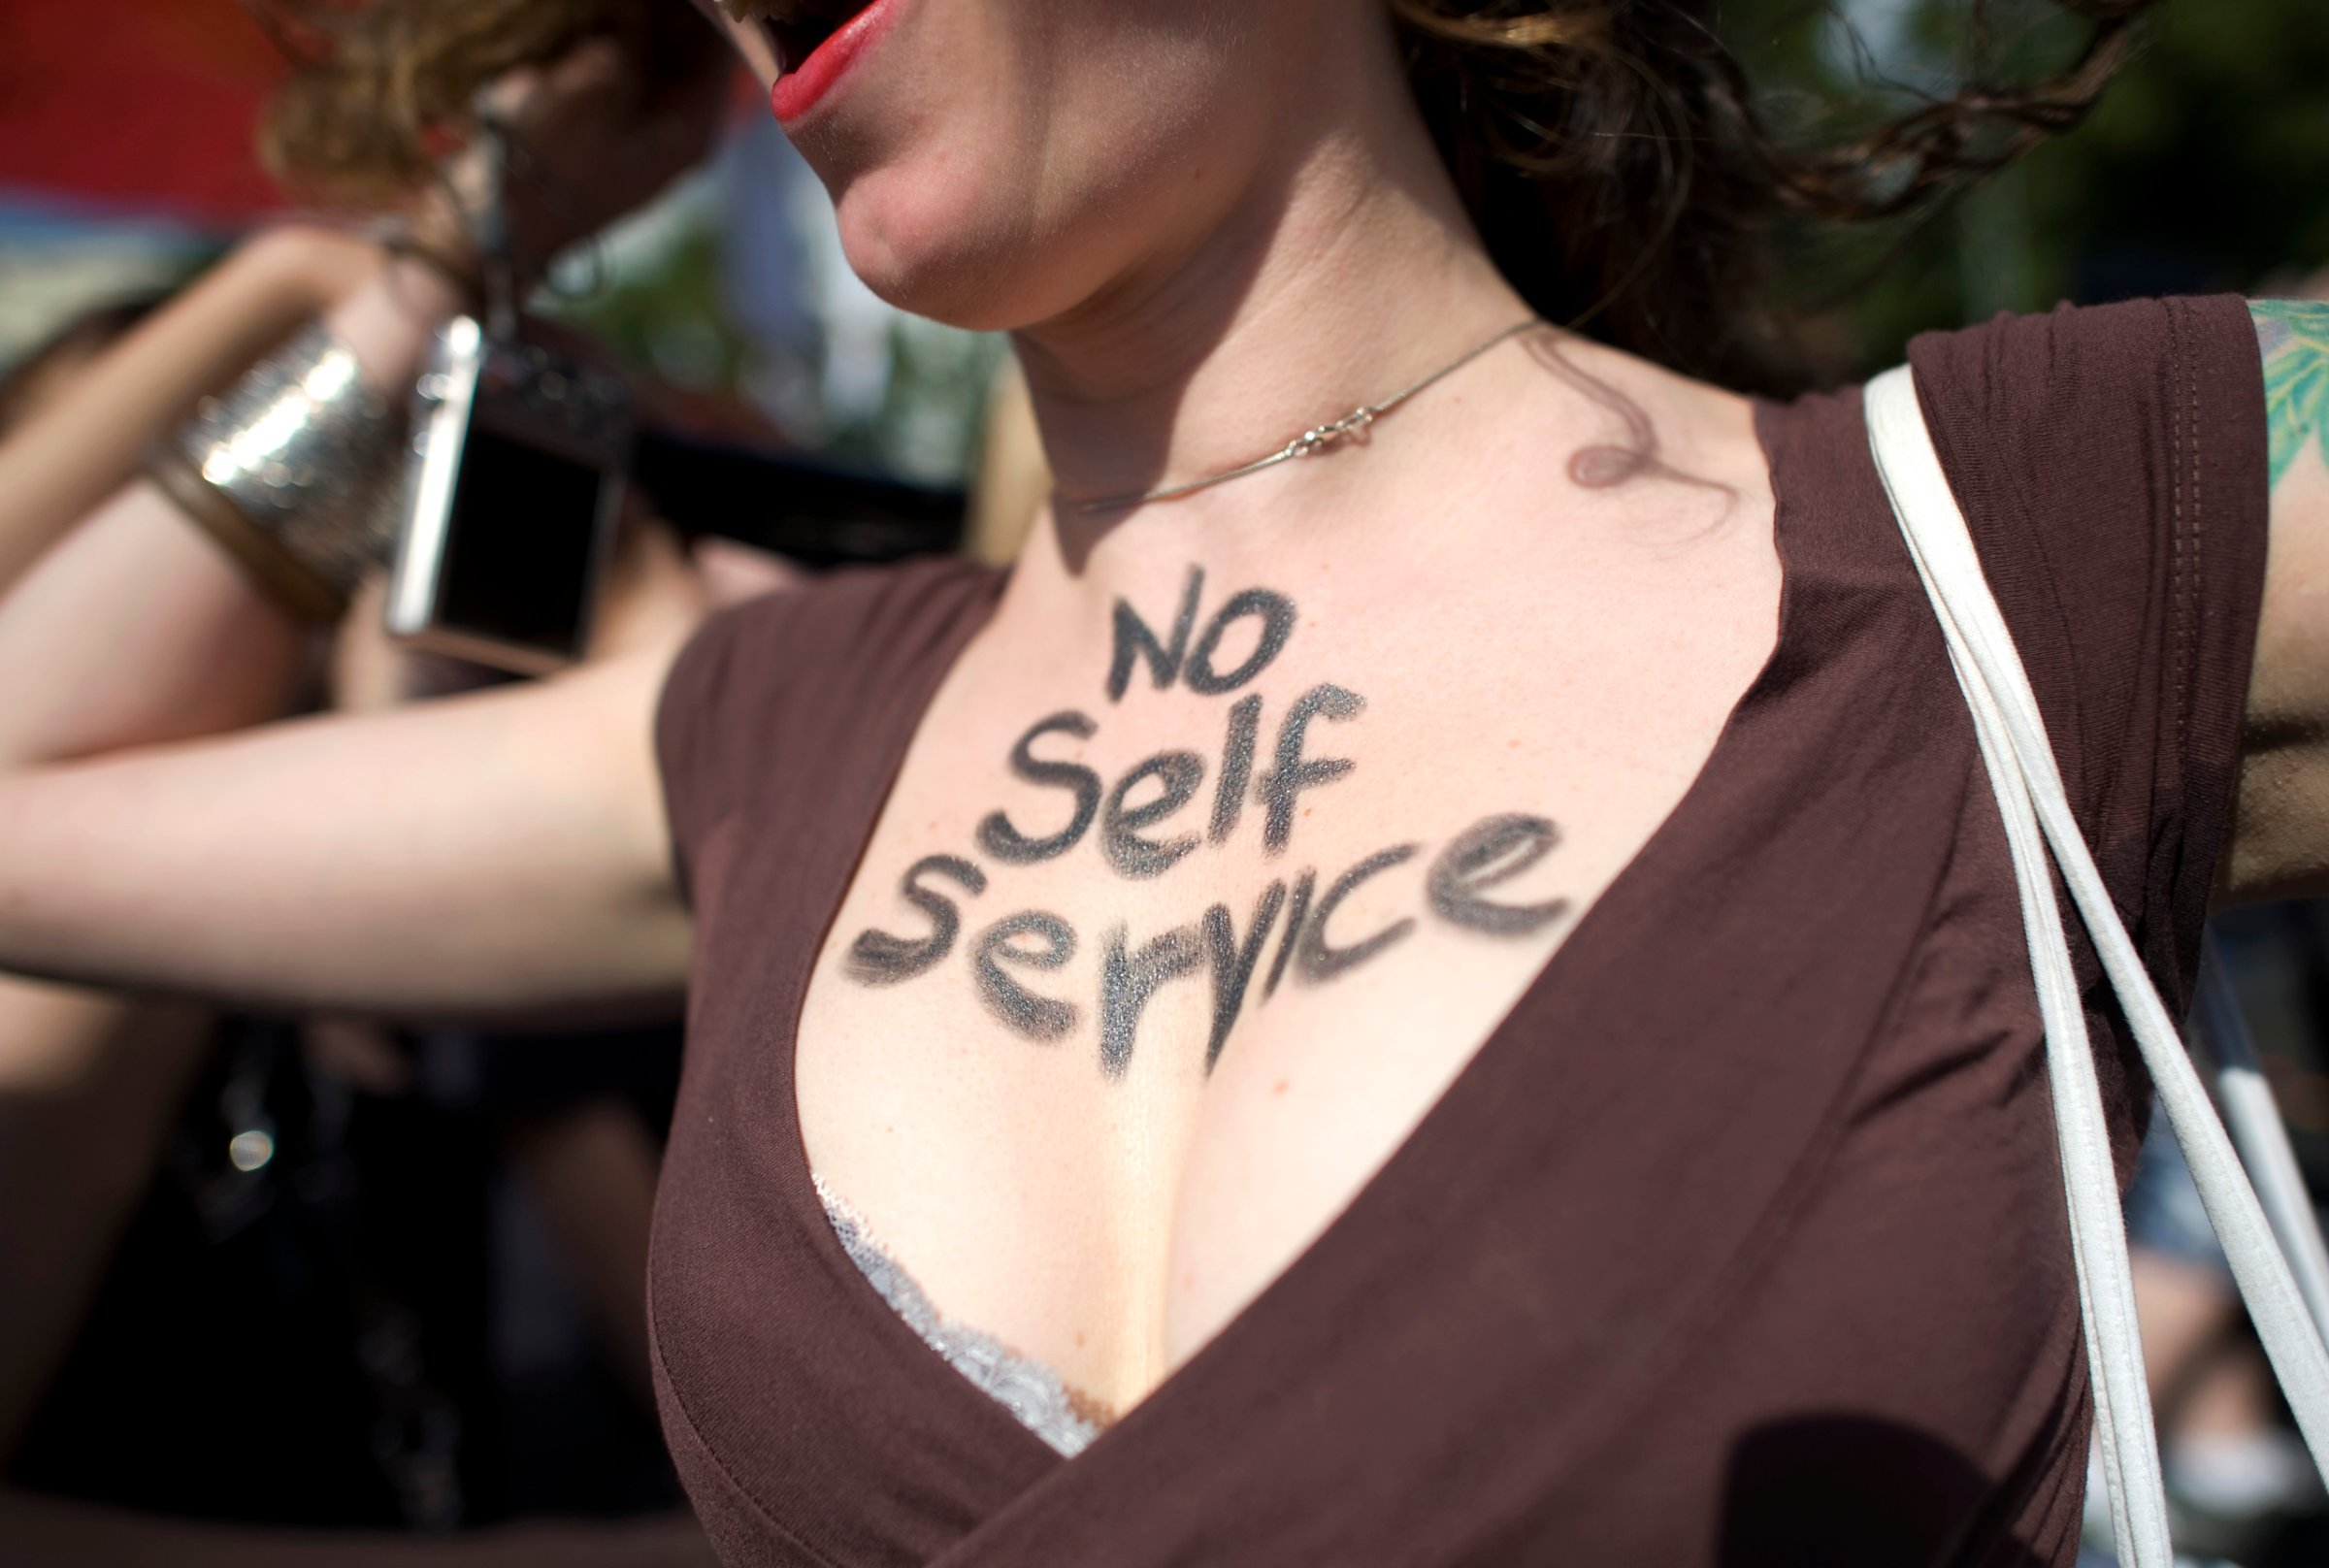 A women walks in a protest against sexual violence in Berlin, Germany on Aug. 8, 2011.